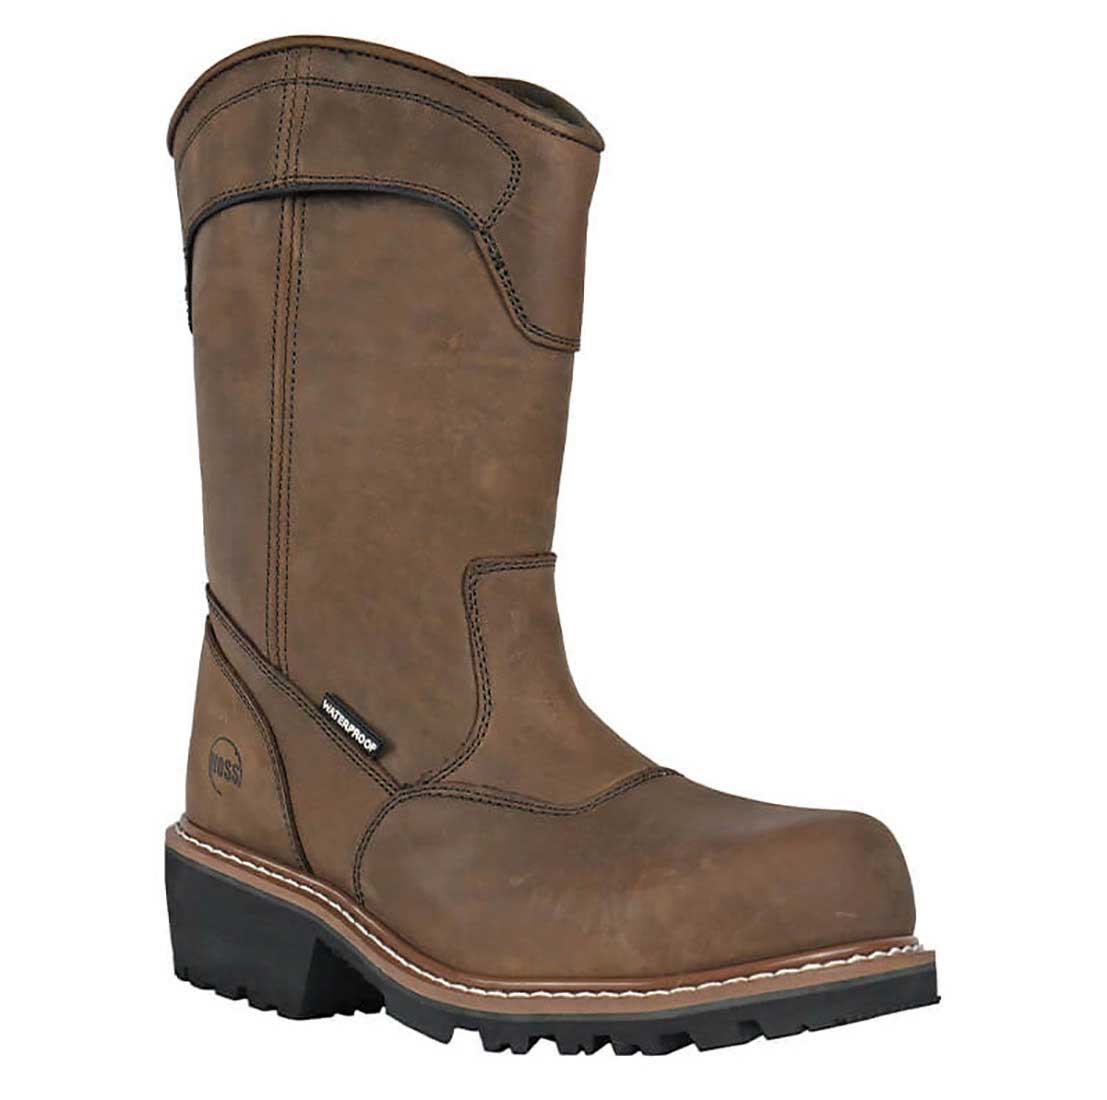 Hoss Boots Aspen Logger Brown - 90211 - Men's 10 Waterproof Composite Safety Toe Pull On Work Boot